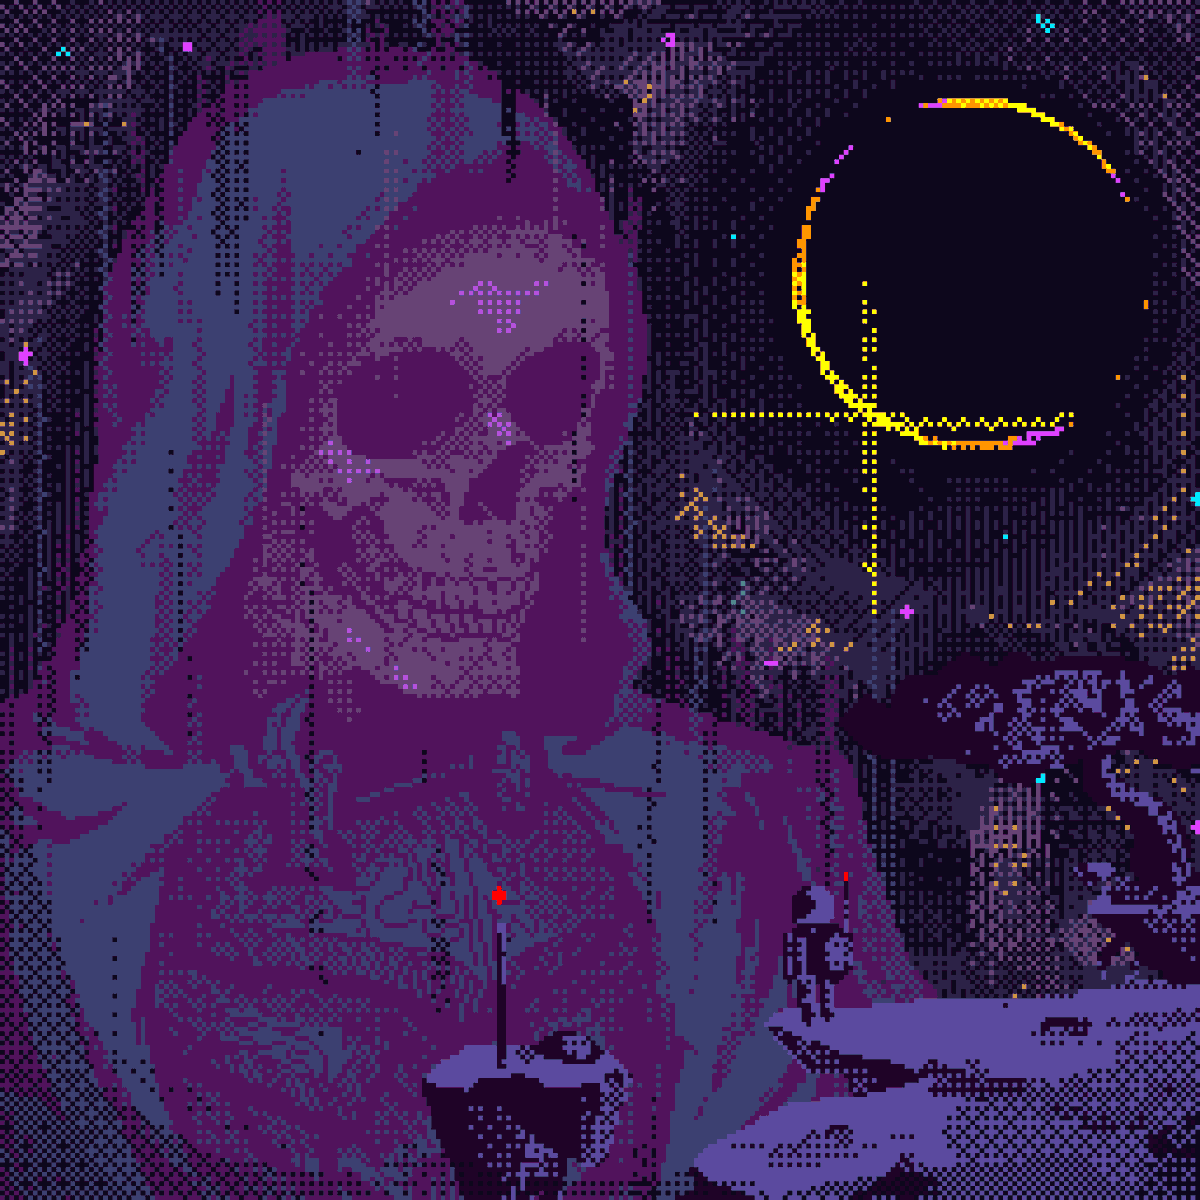 Tried to come up with new compositions with this one

Inktober 2023
Day 23: Celestial

#inktoberprompts #inktoberchallenge #inktober2023 #inktober #pixelart #pixels #retroaesthetic #retro #oldschool #skull #skeletons #macabre #skullartwork #space #galaxy